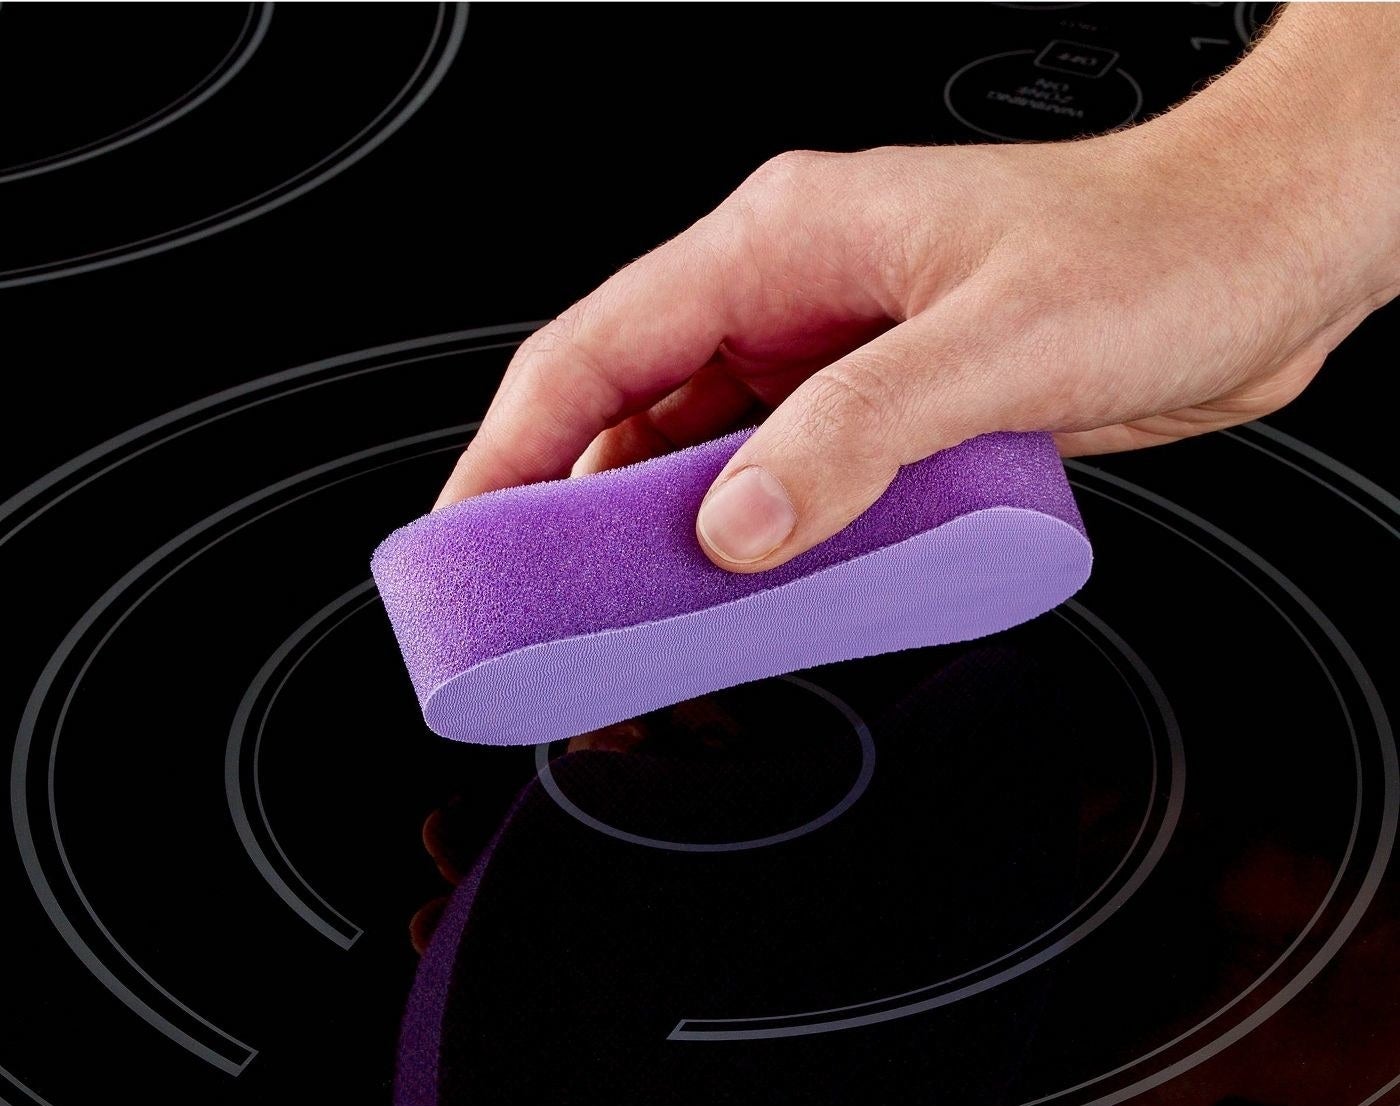 a model using a purple sponge to clean a stovetop